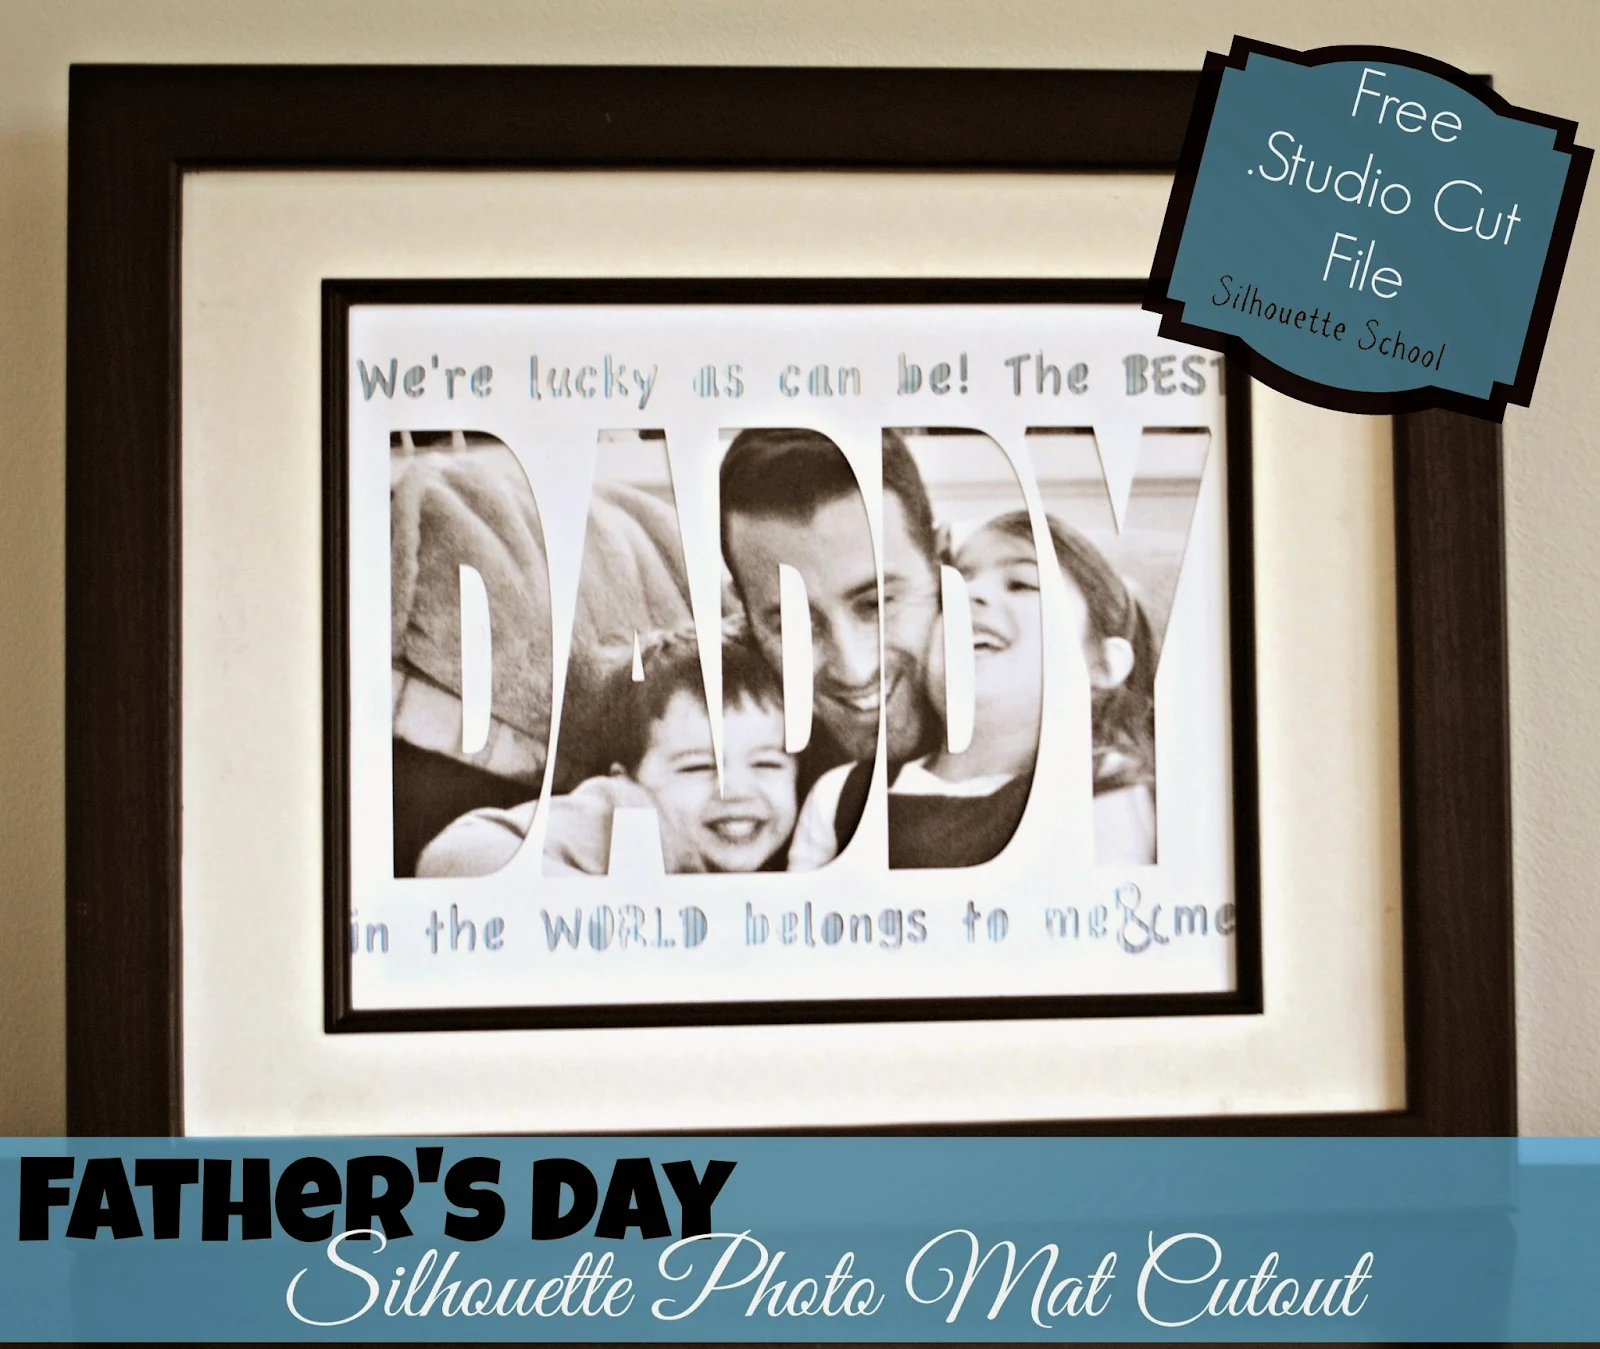 Silhouette Studio, free cut file, Daddy card, Father's Day, Silhouette tutorial